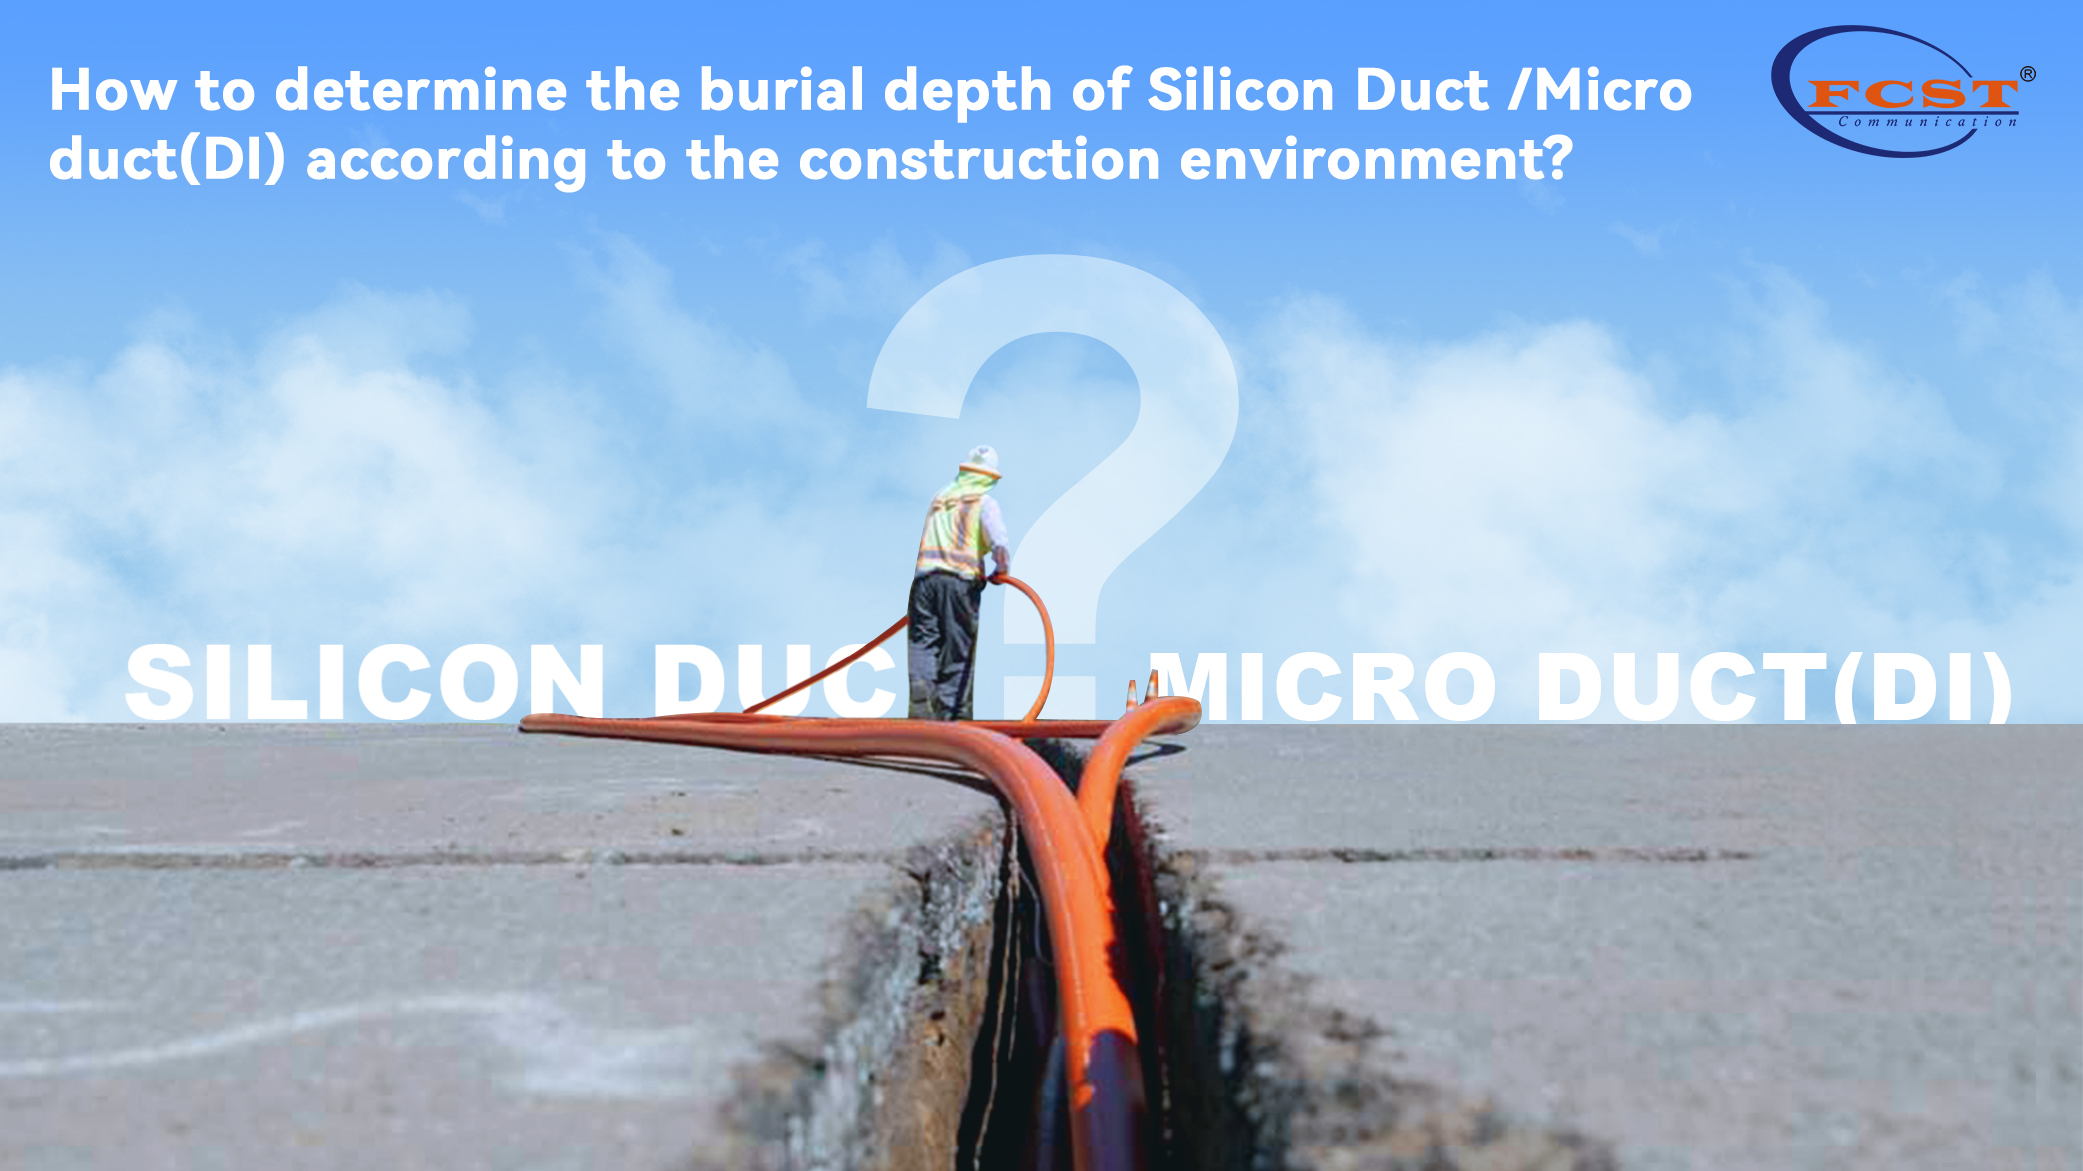 How to determine the burial depth of Silicon Duct /Micro duct(DI) according to the construction environment?